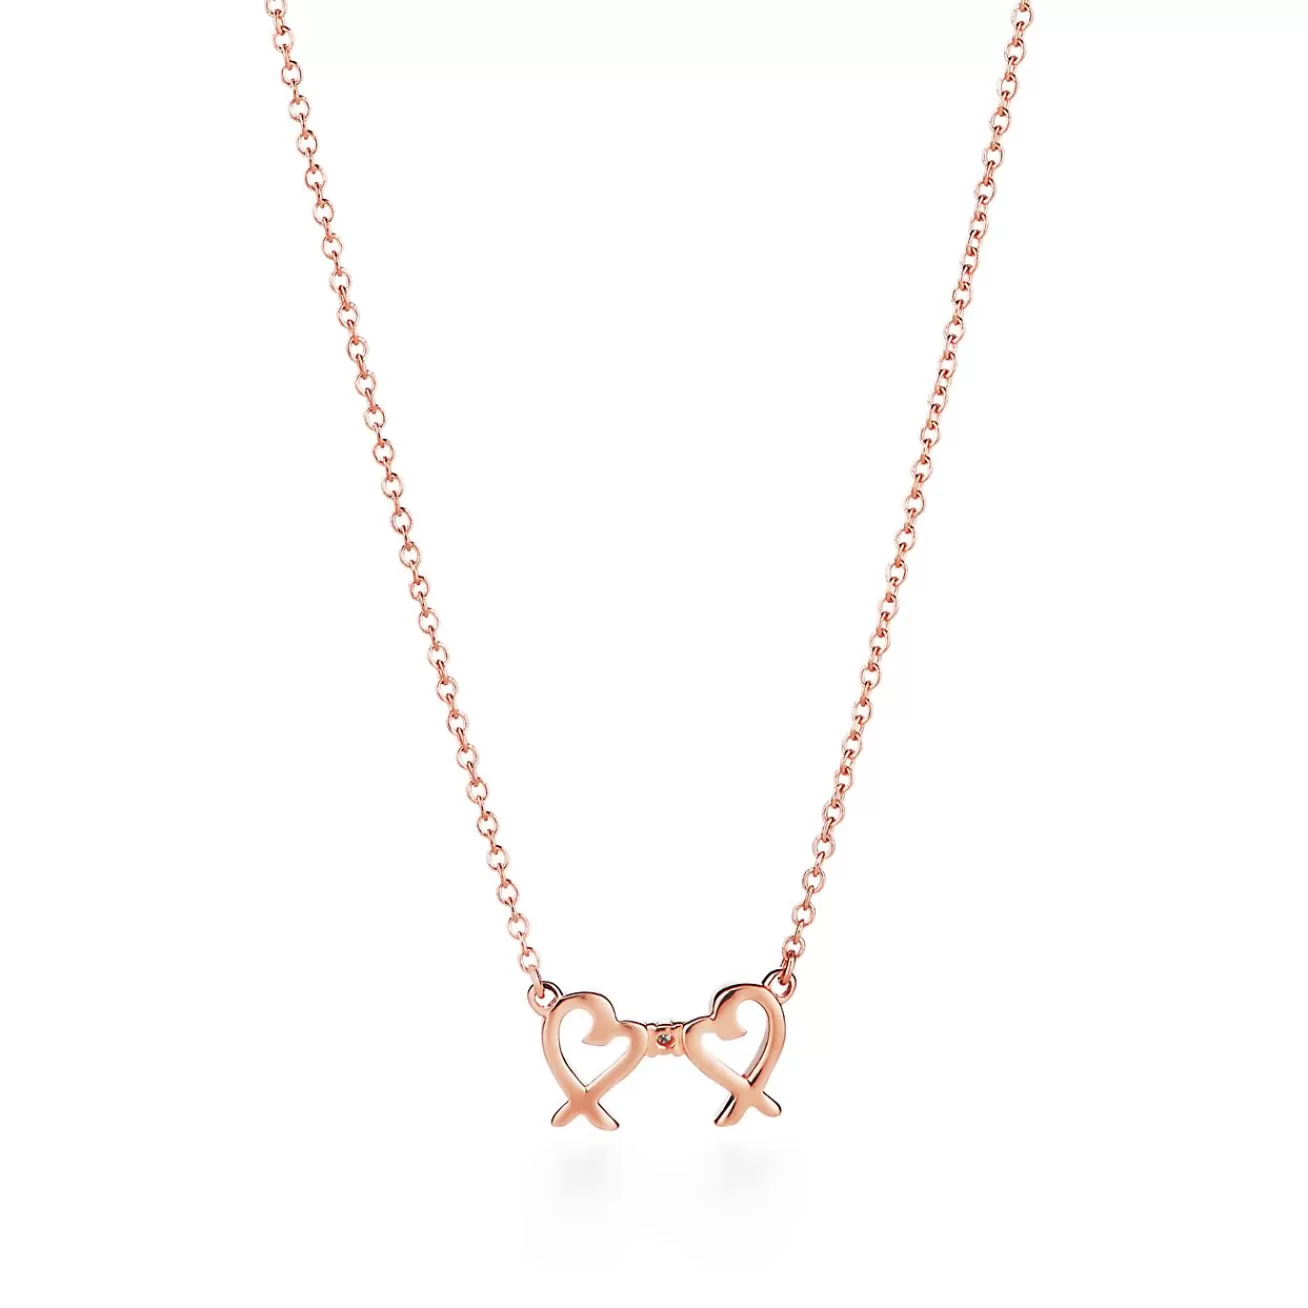 Tiffany & Co. Paloma Picasso® Double Loving Heart pendant in 18k rose gold with diamonds. | ^ Necklaces & Pendants | Rose Gold Jewelry